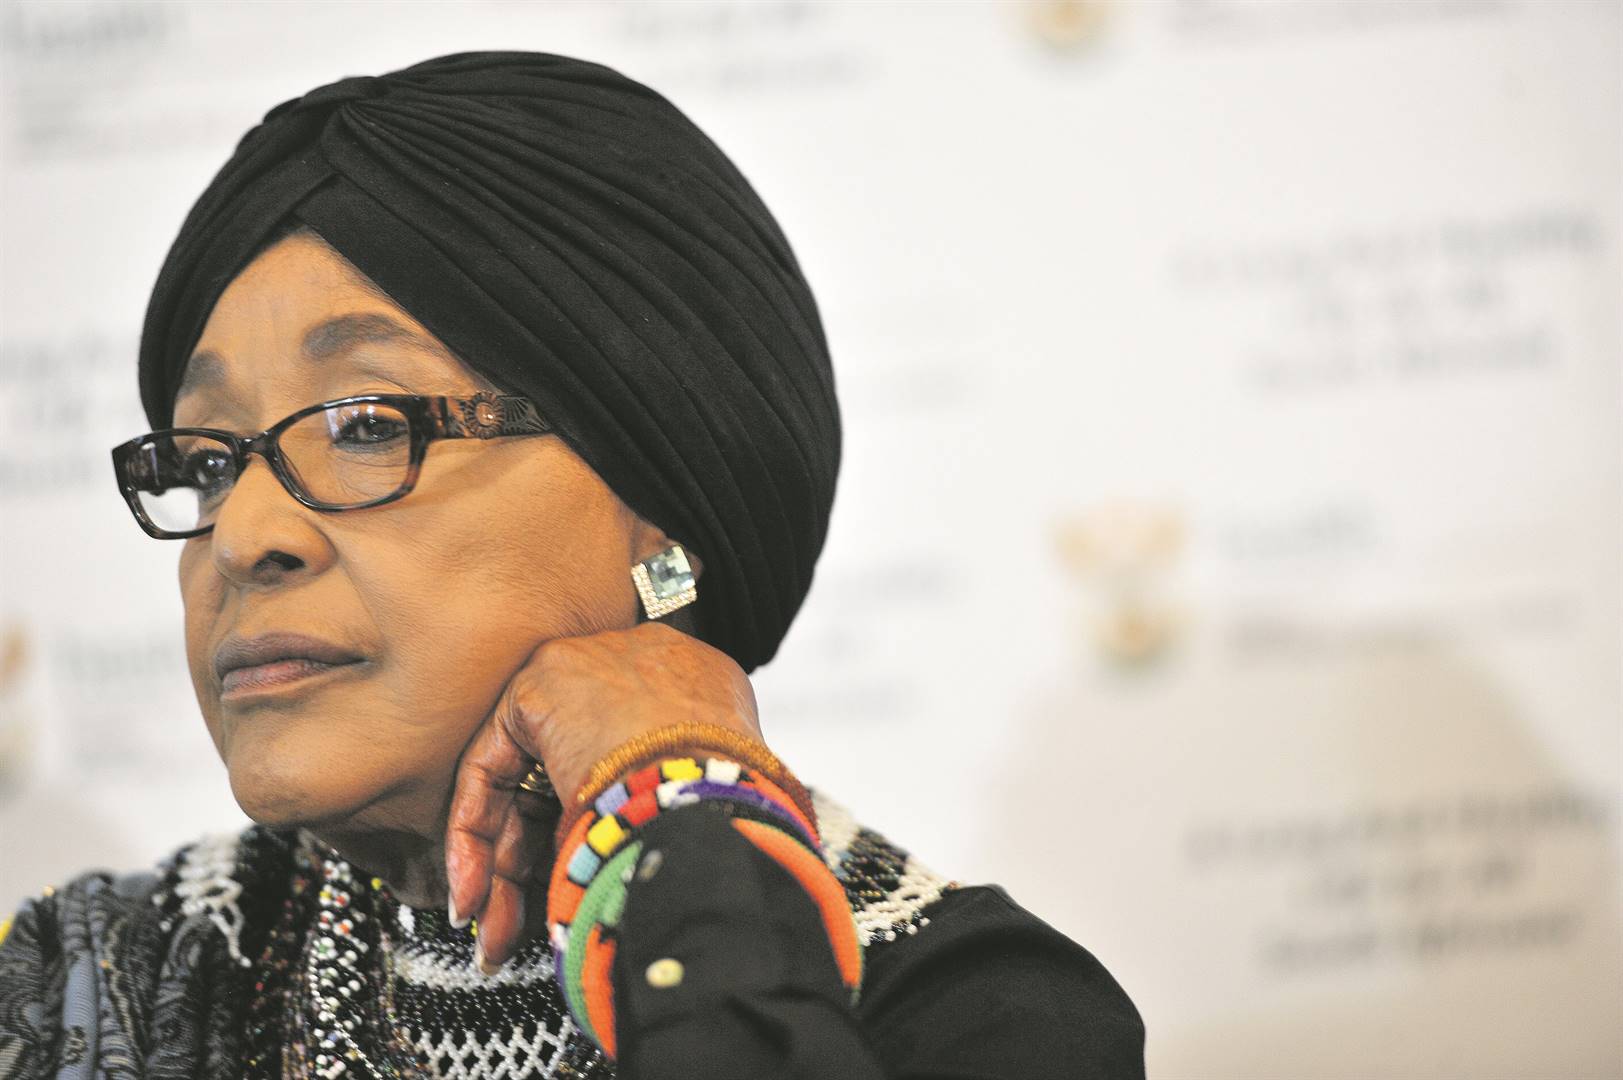 Figures such as Charlotte Maxeke, Albertina Sisulu, Winnie Mandela and Ruth First advocatED women’s rights